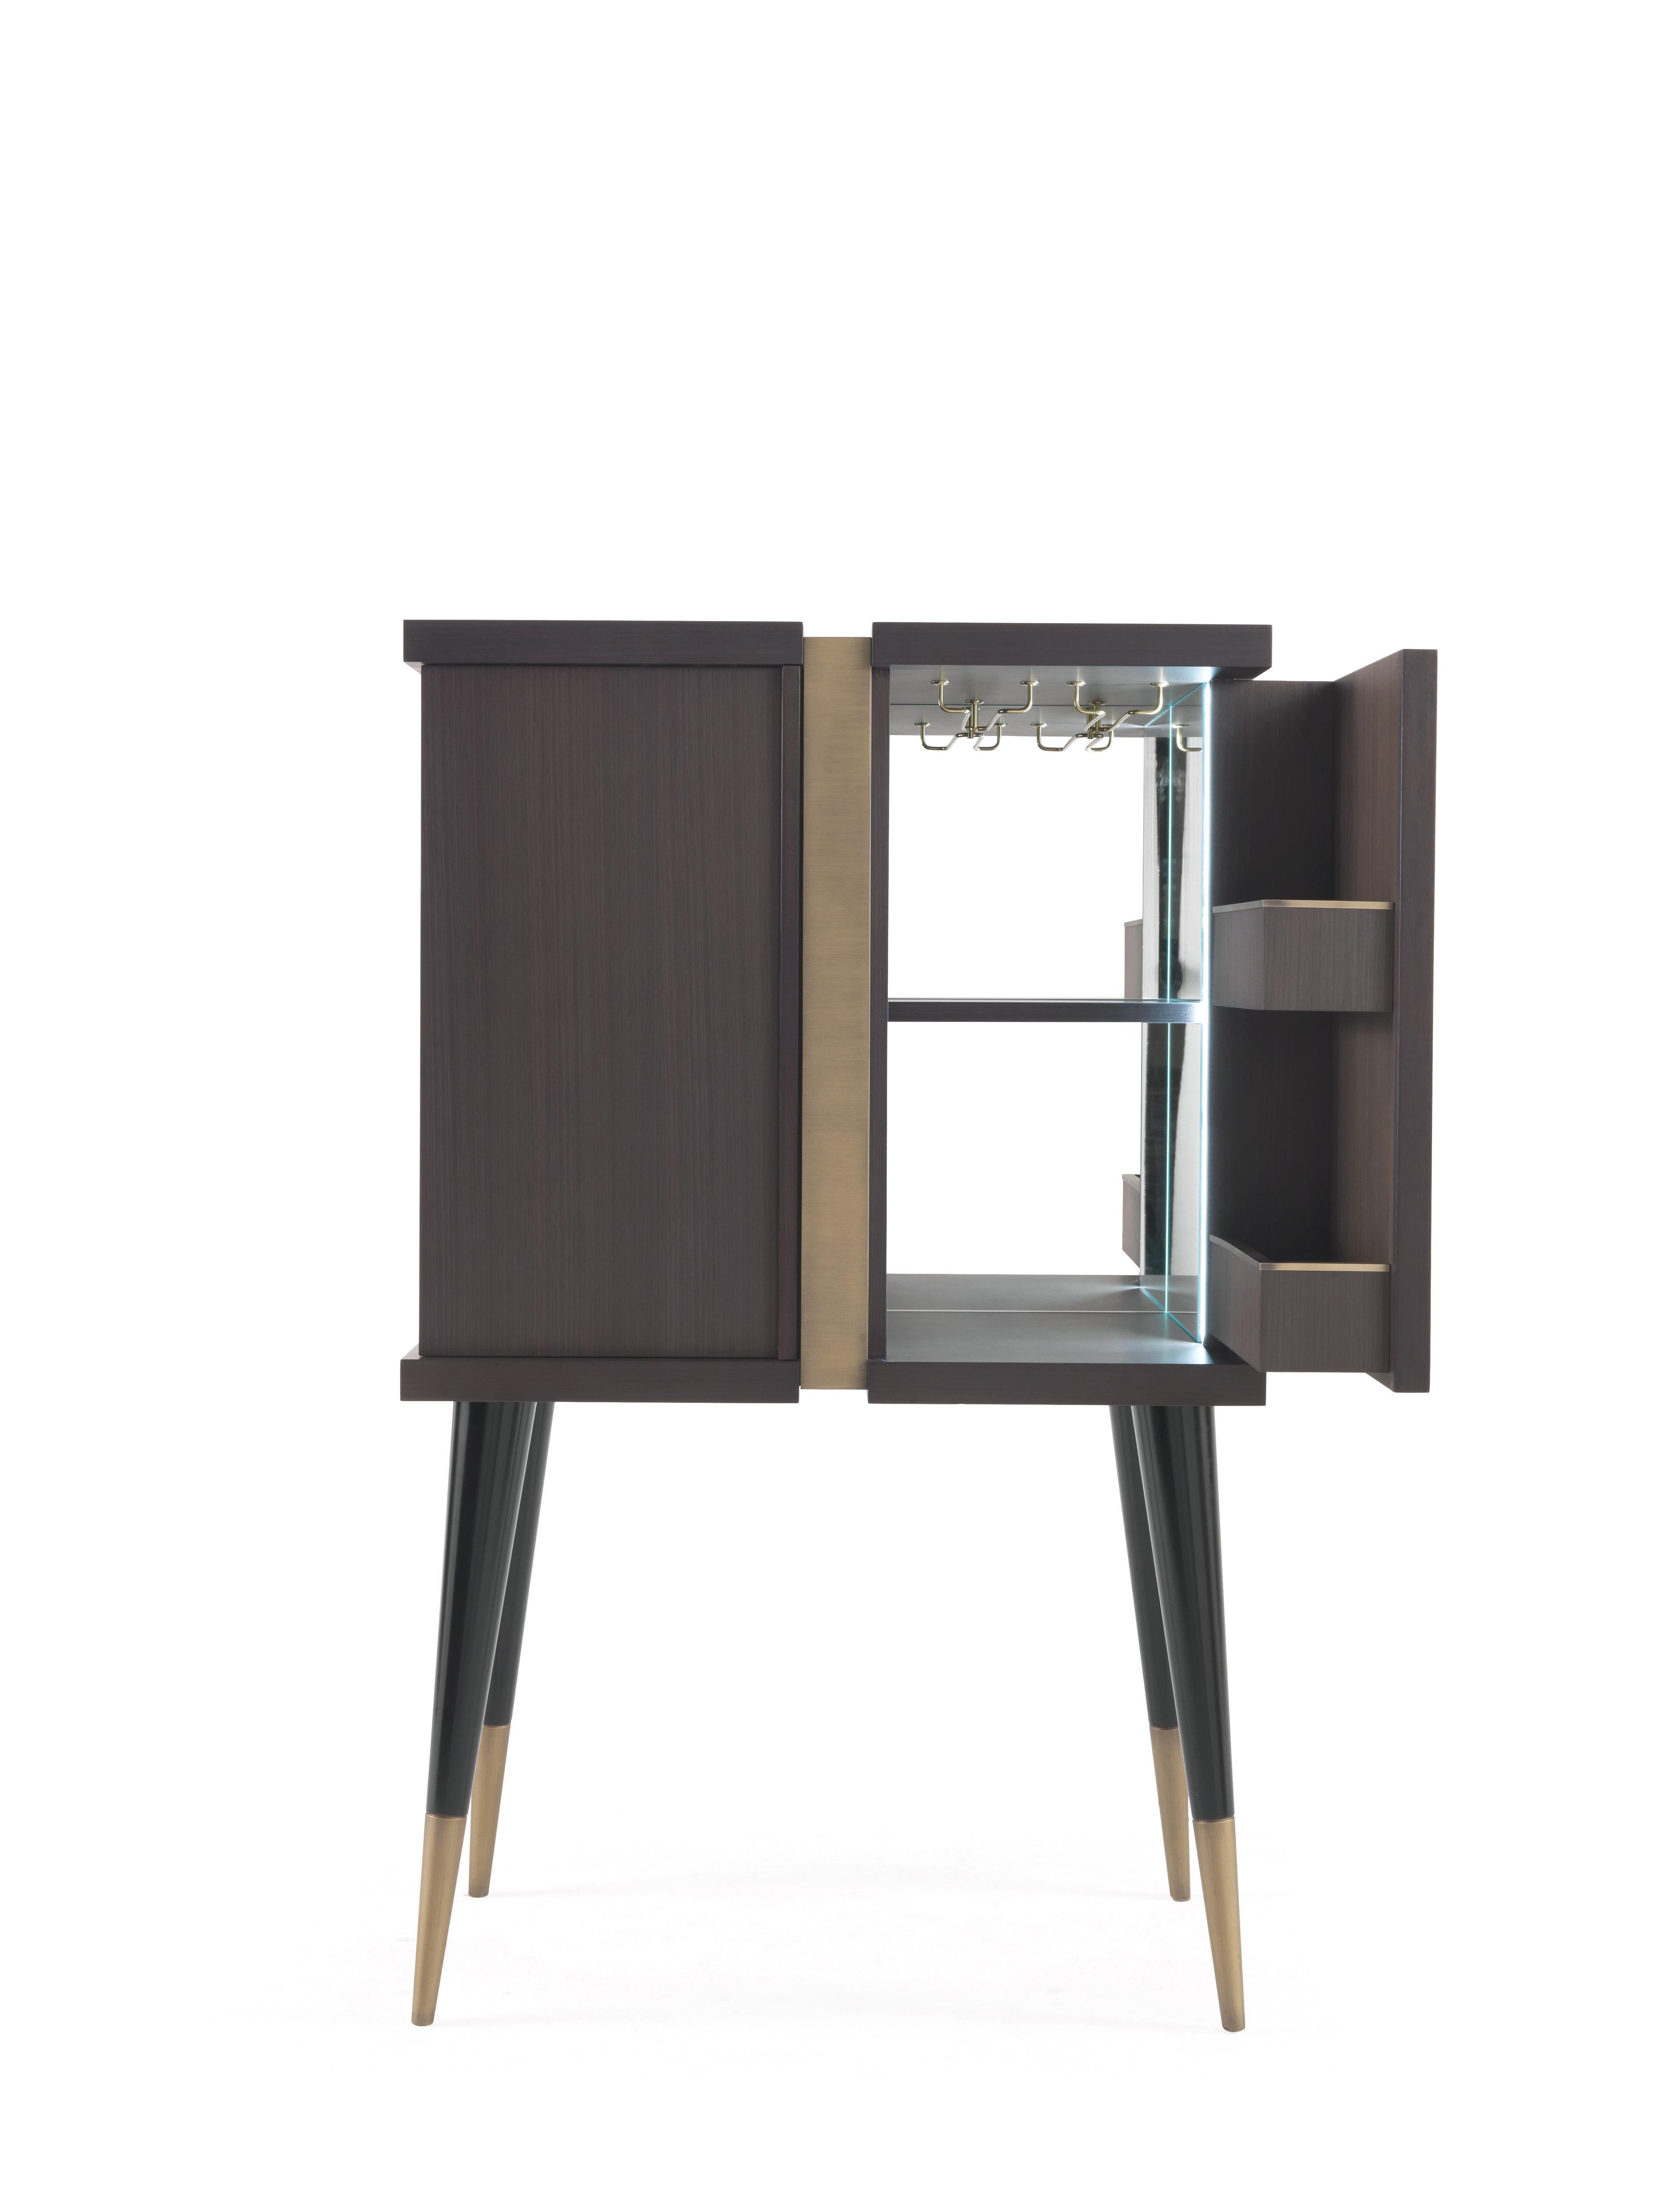 Featuring a solid structure in Tay wood tinted smoky grey with a bronzed central band, the Sean bar unit reveals a luminous interior with mirror and polished brass profiles, while the inclined legs with brass ferrule add a vintage touch to the piece